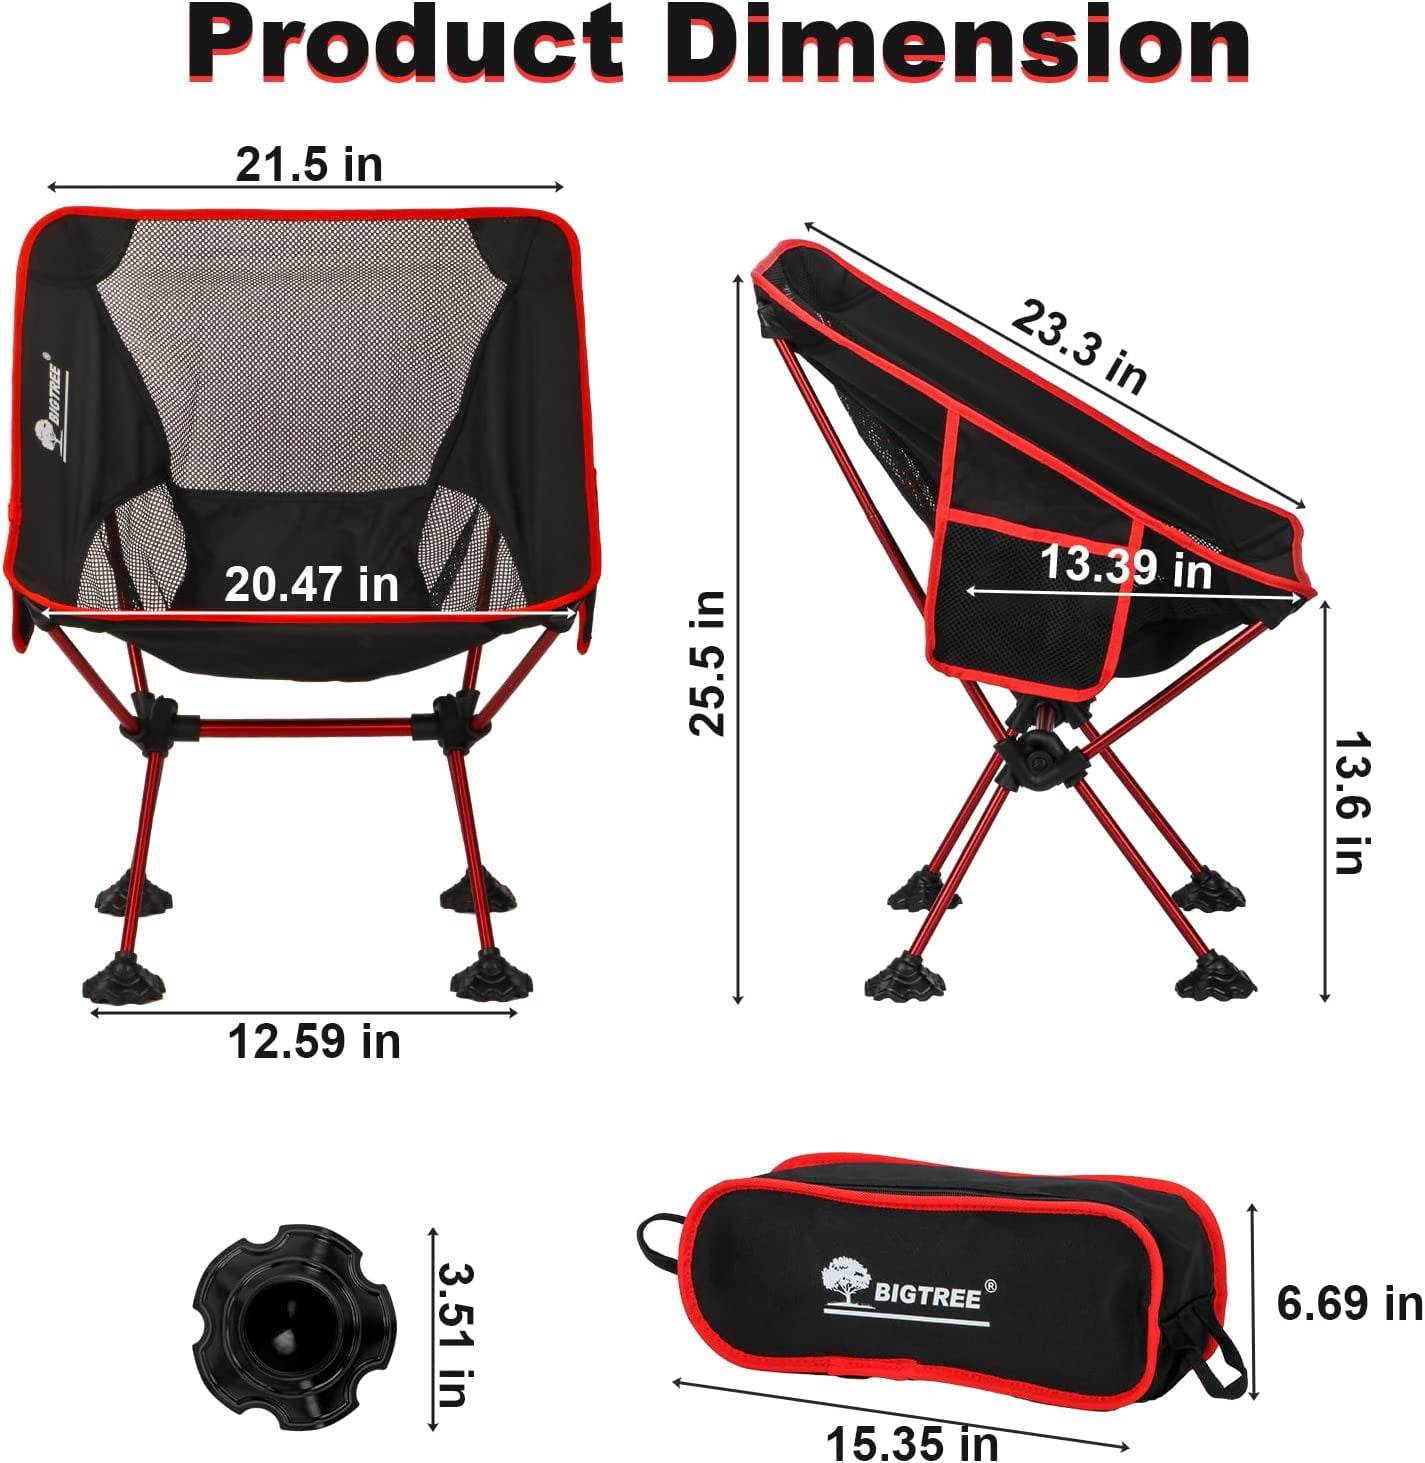 BIGTREE Folding Camping Chair Travel Seat Side Pocket Super Compact Light Fishing Picnic Red